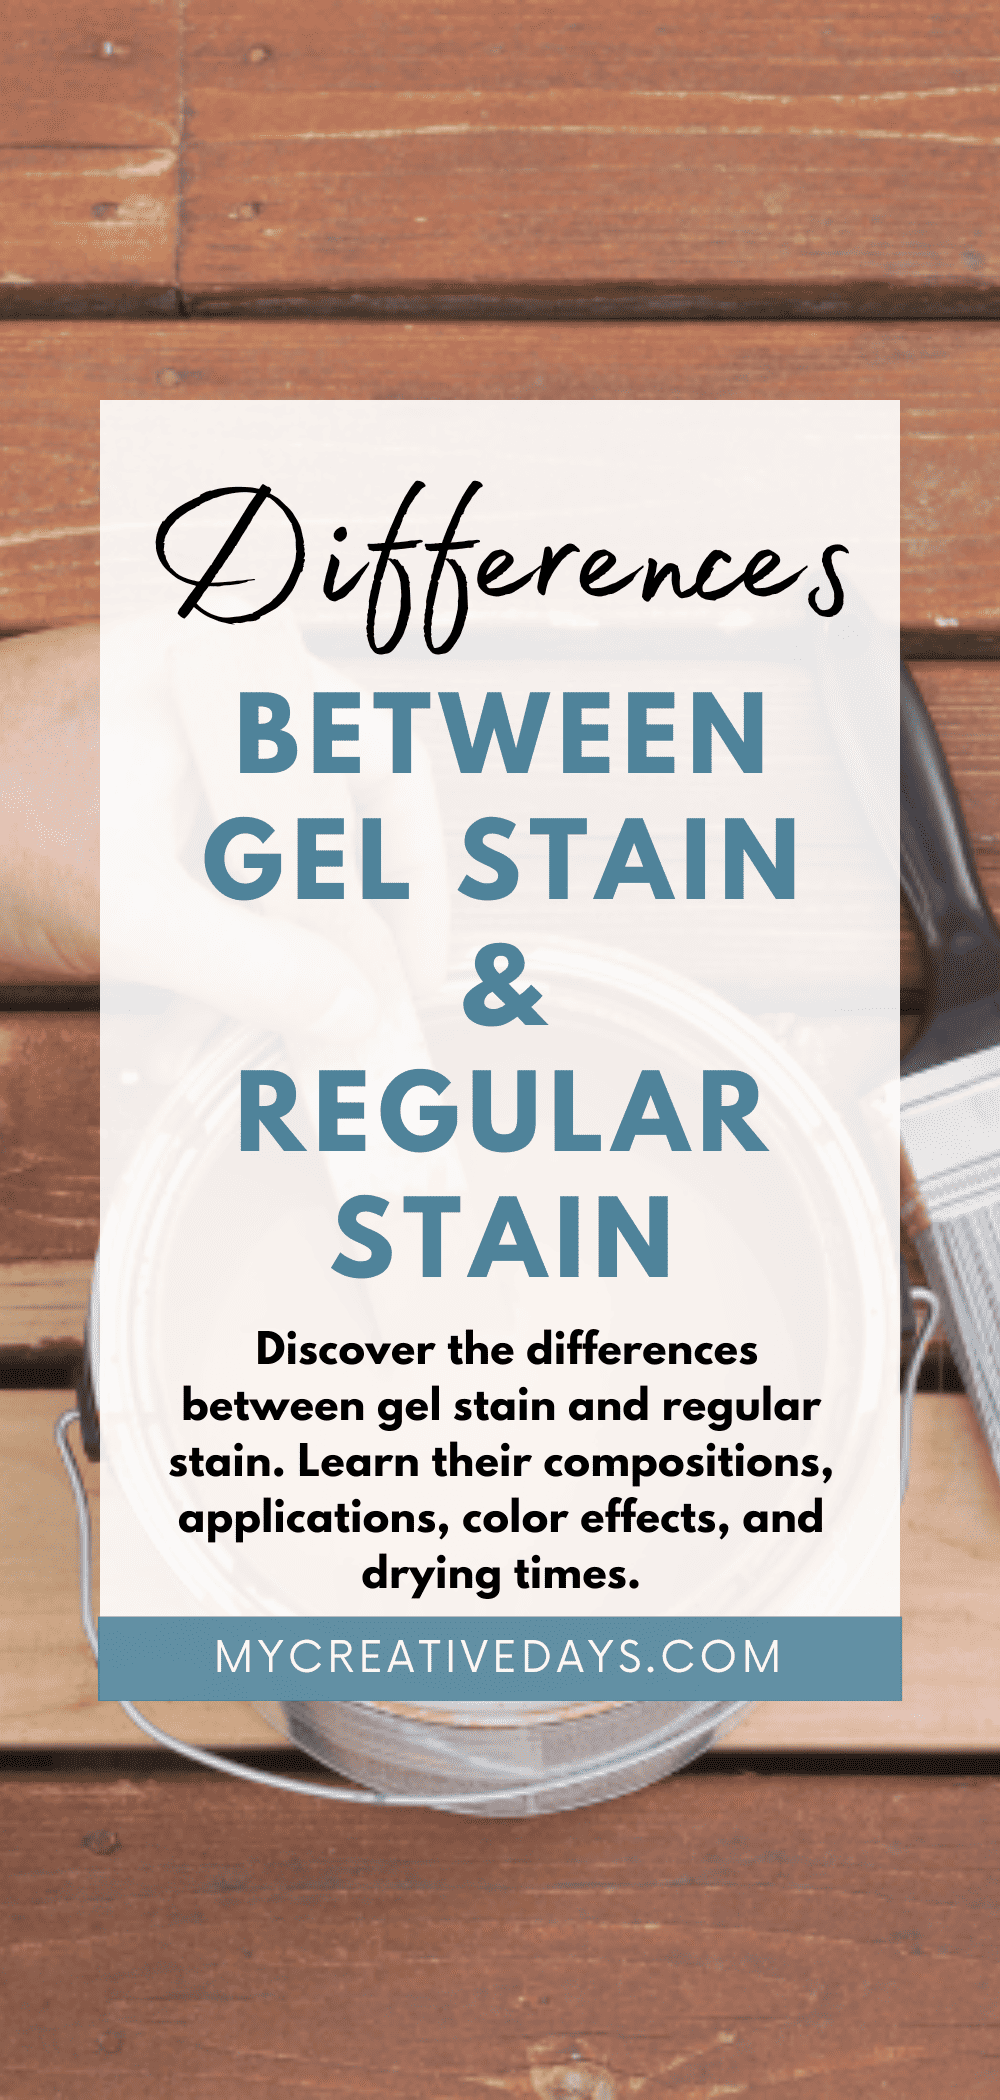 Discover the differences between gel stain and regular stain. Learn their compositions, applications, color effects, and drying times.